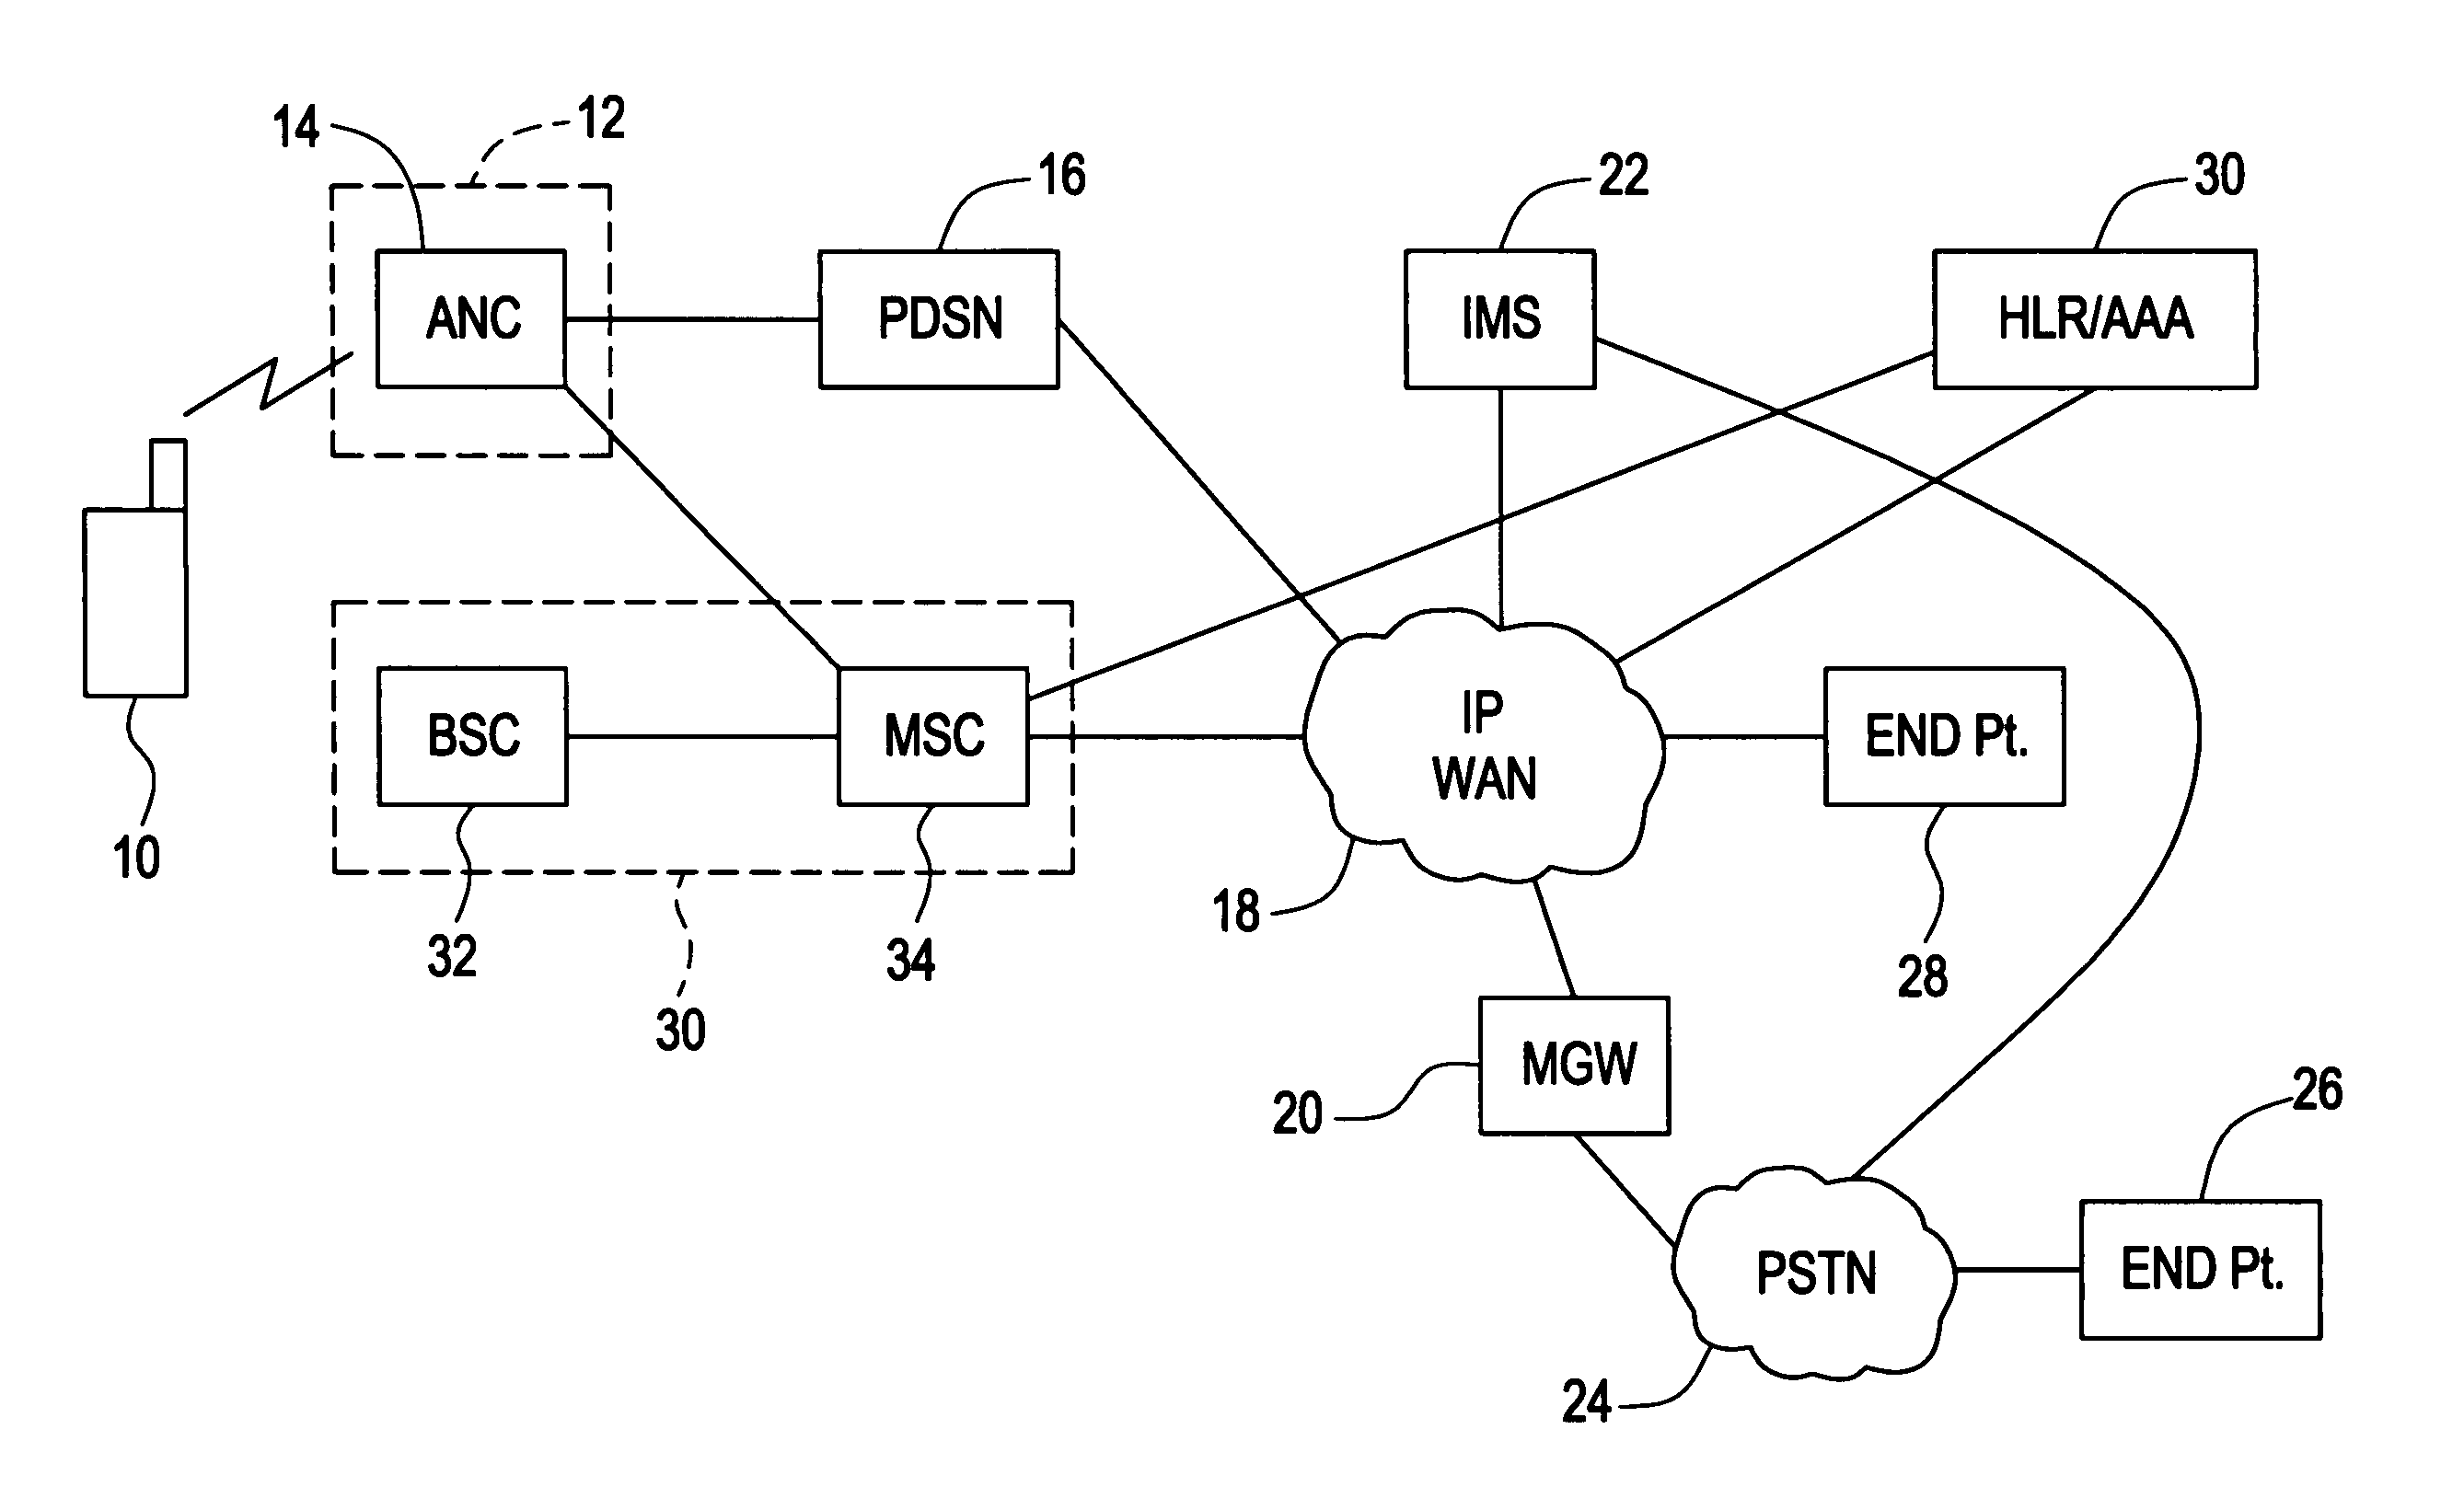 Method of transferring a packet switched to a circuit switched call